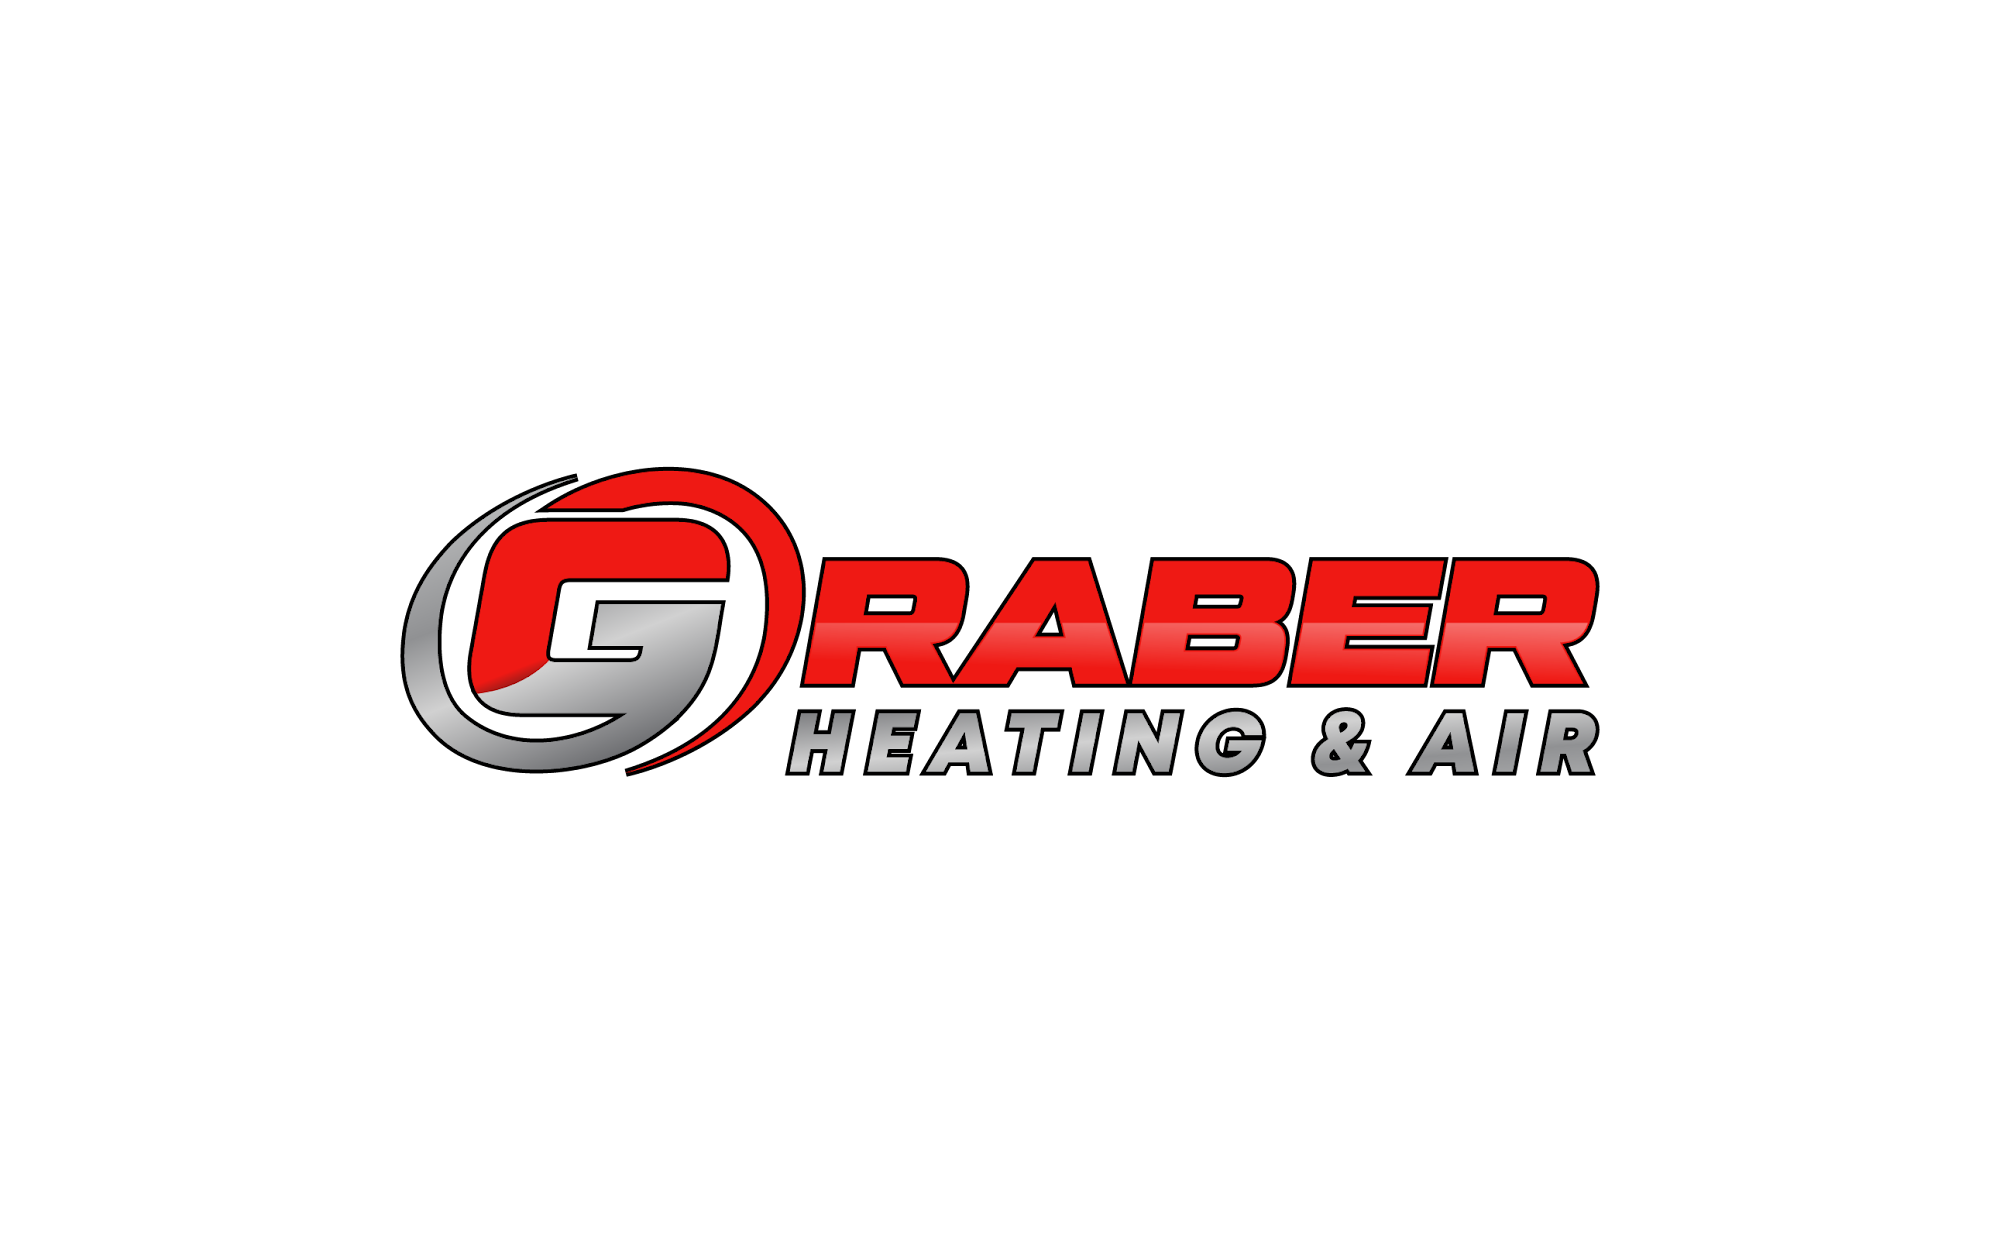 Graber Heating & Air Conditioning, Inc. 1302 Angle Rd SW, Kalona Iowa 52247